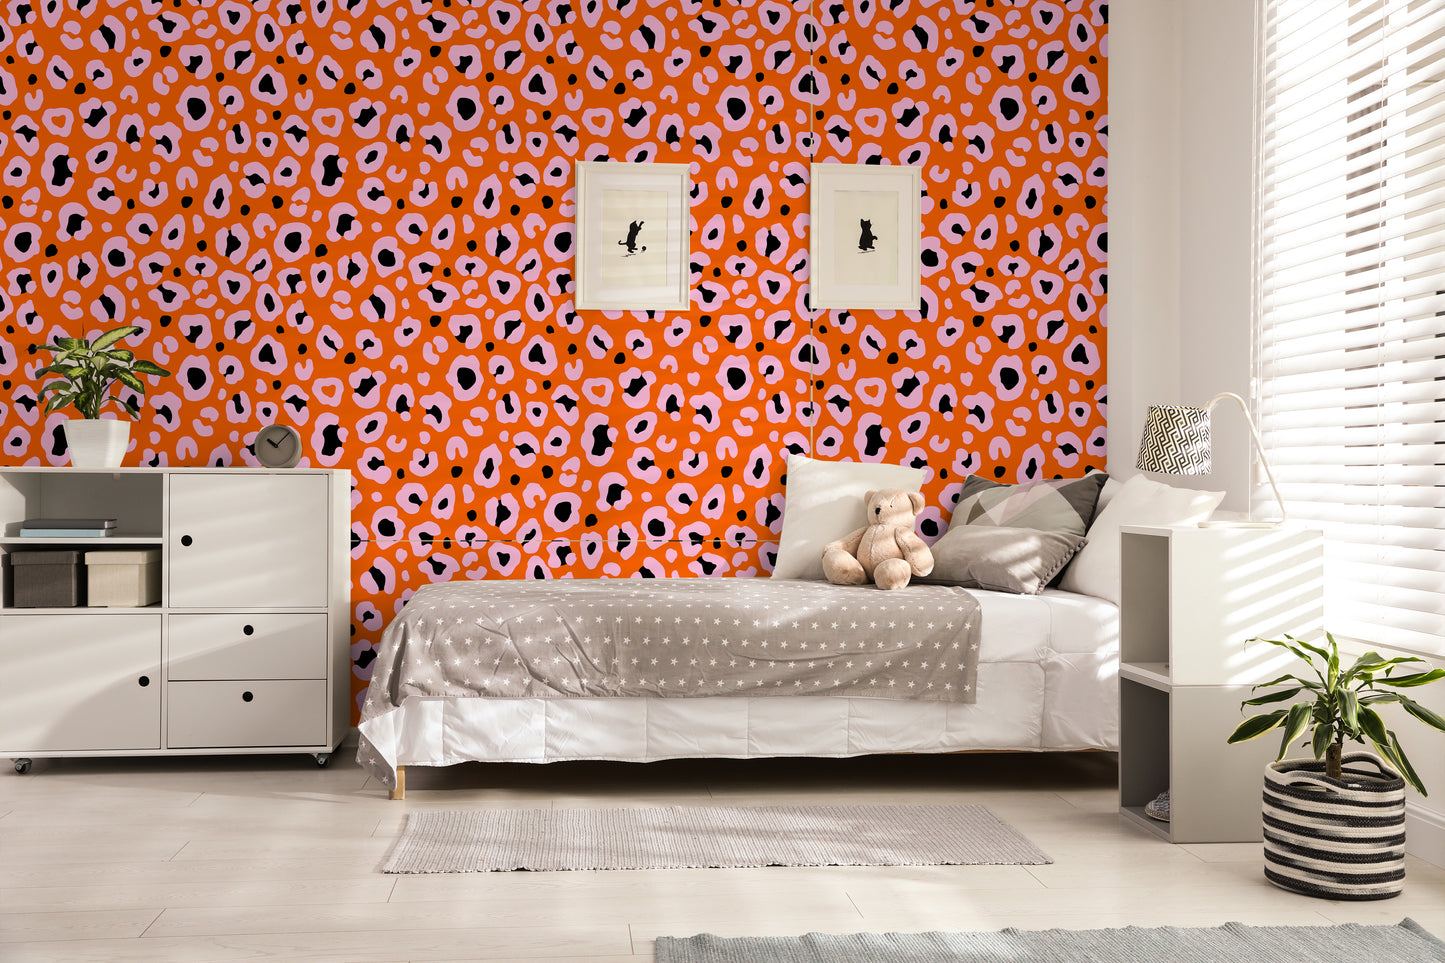 This modern leopard print wallpaper brings life to a traditional childrens room